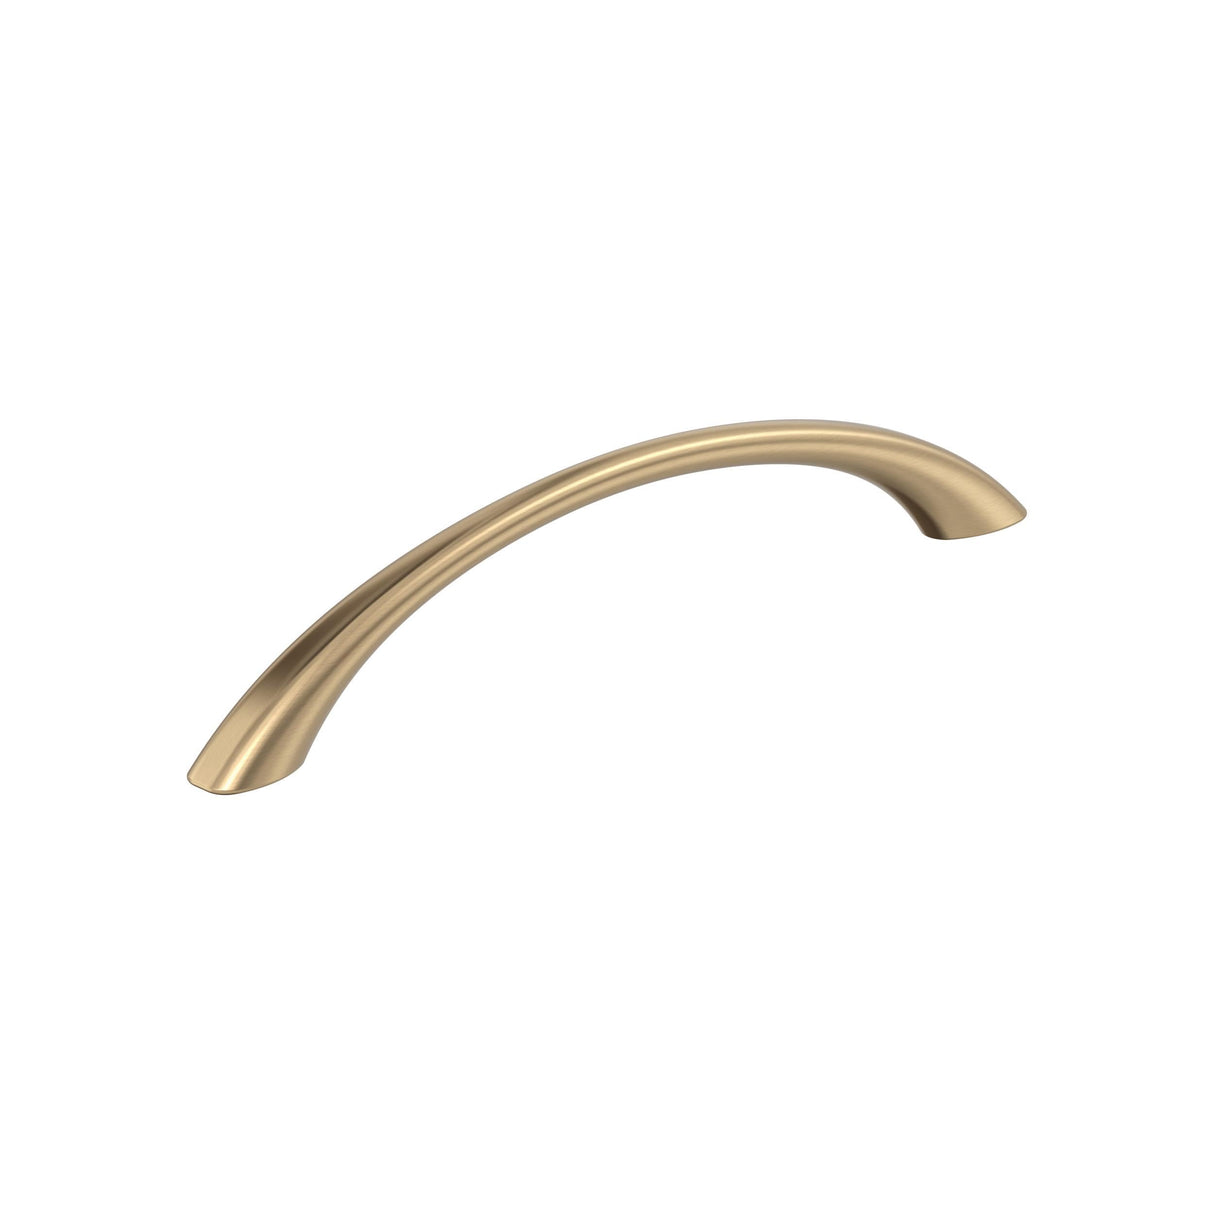 Amerock BP37232CZ Champagne Bronze Cabinet Pull 6-5/16 inch (160mm) Center-to-Center Cabinet Hardware Vaile Furniture Hardware Drawer Pull